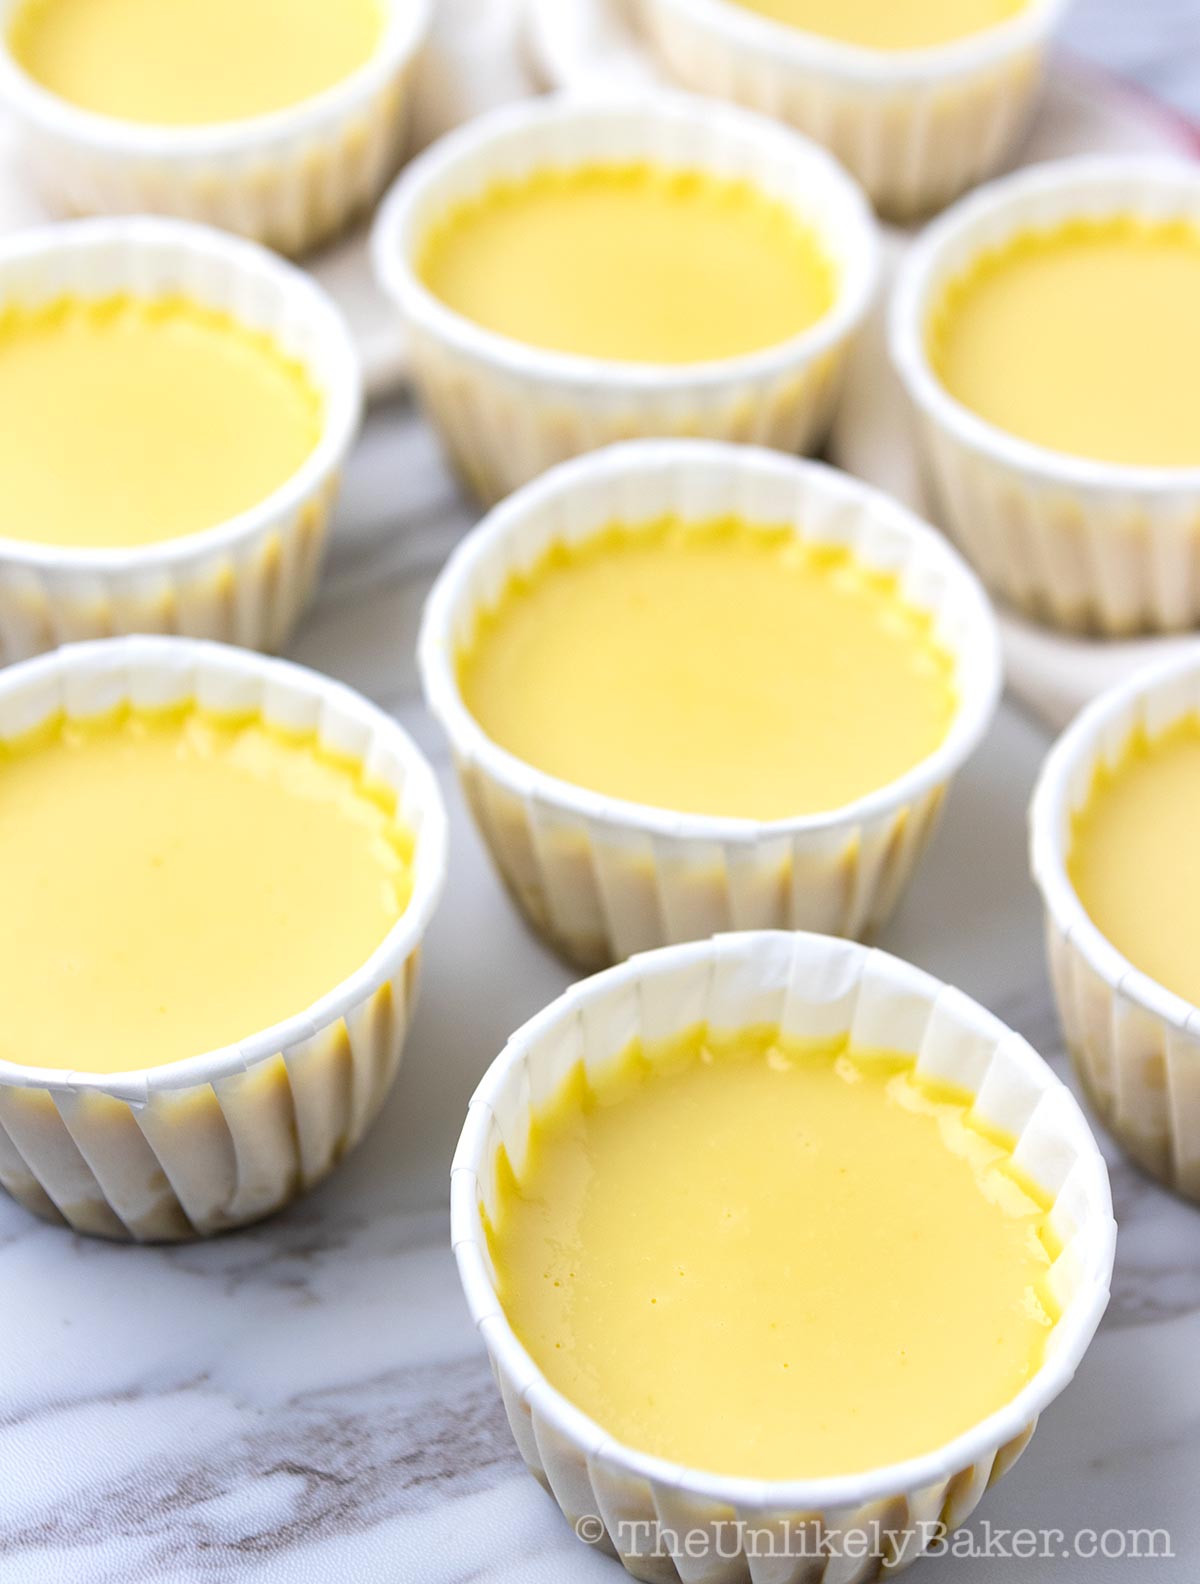 Smooth and creamy flan in cupcake cups.